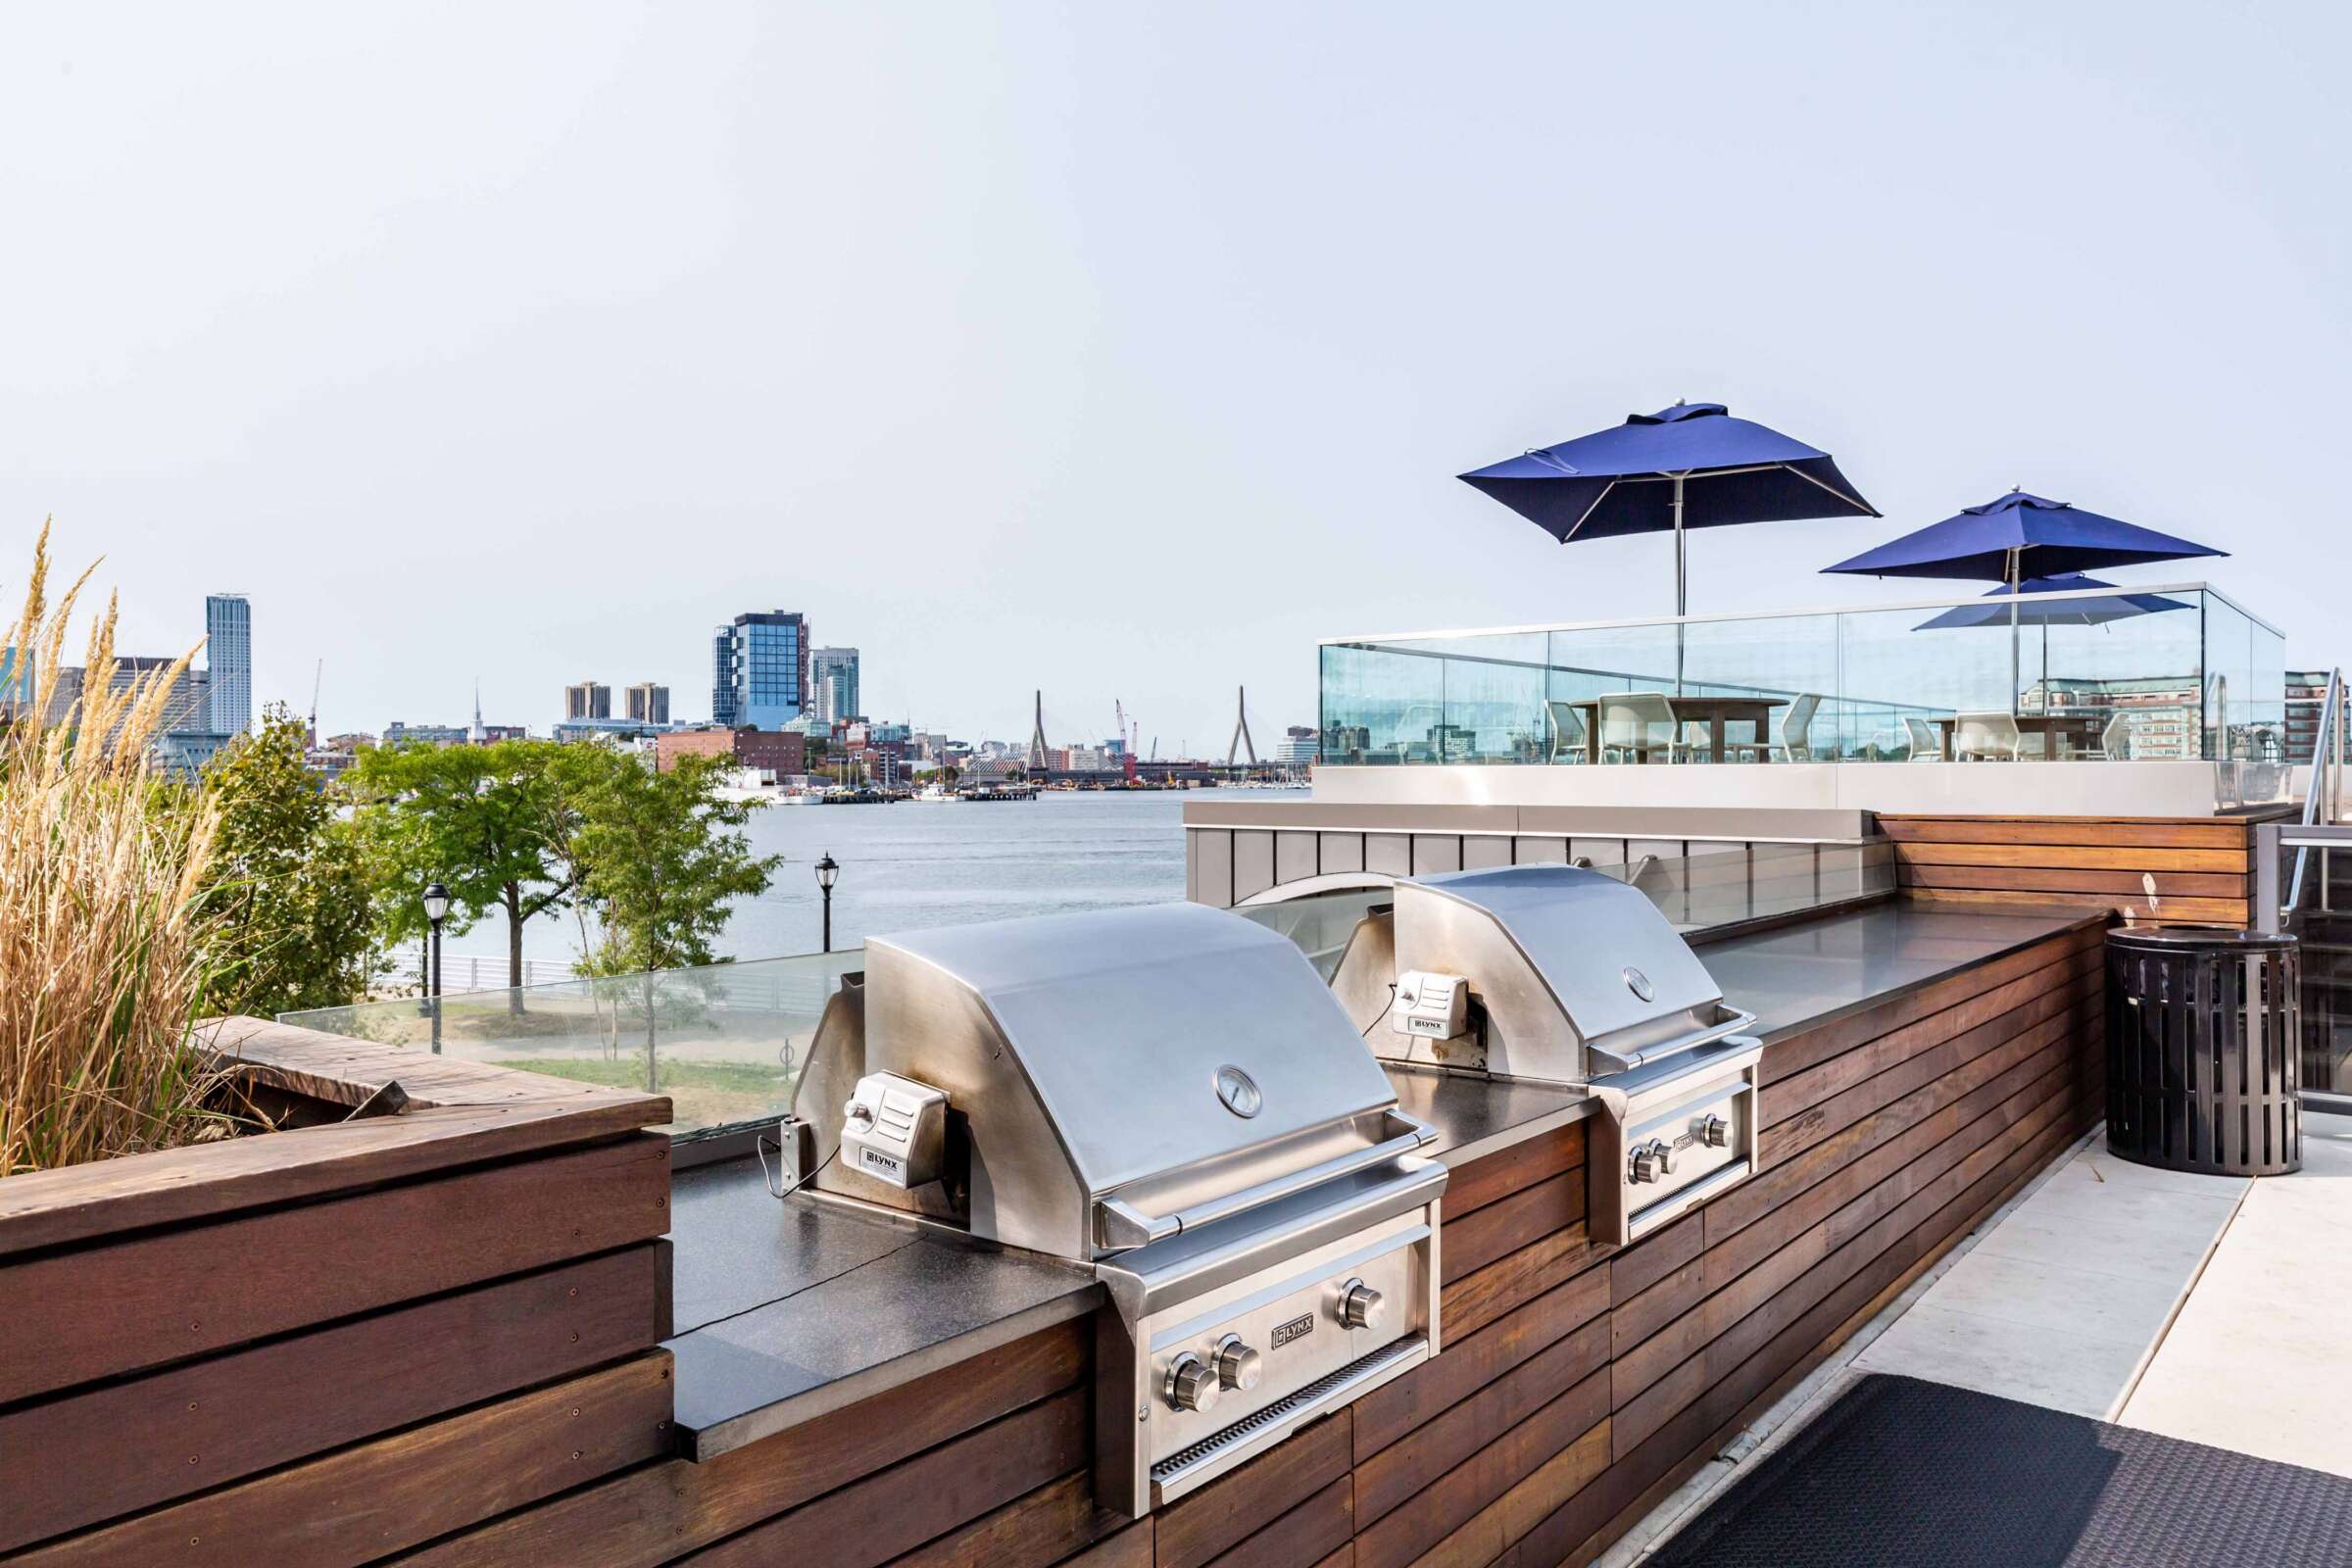 The Eddy East Boston Apartments rooftop terrace with grills